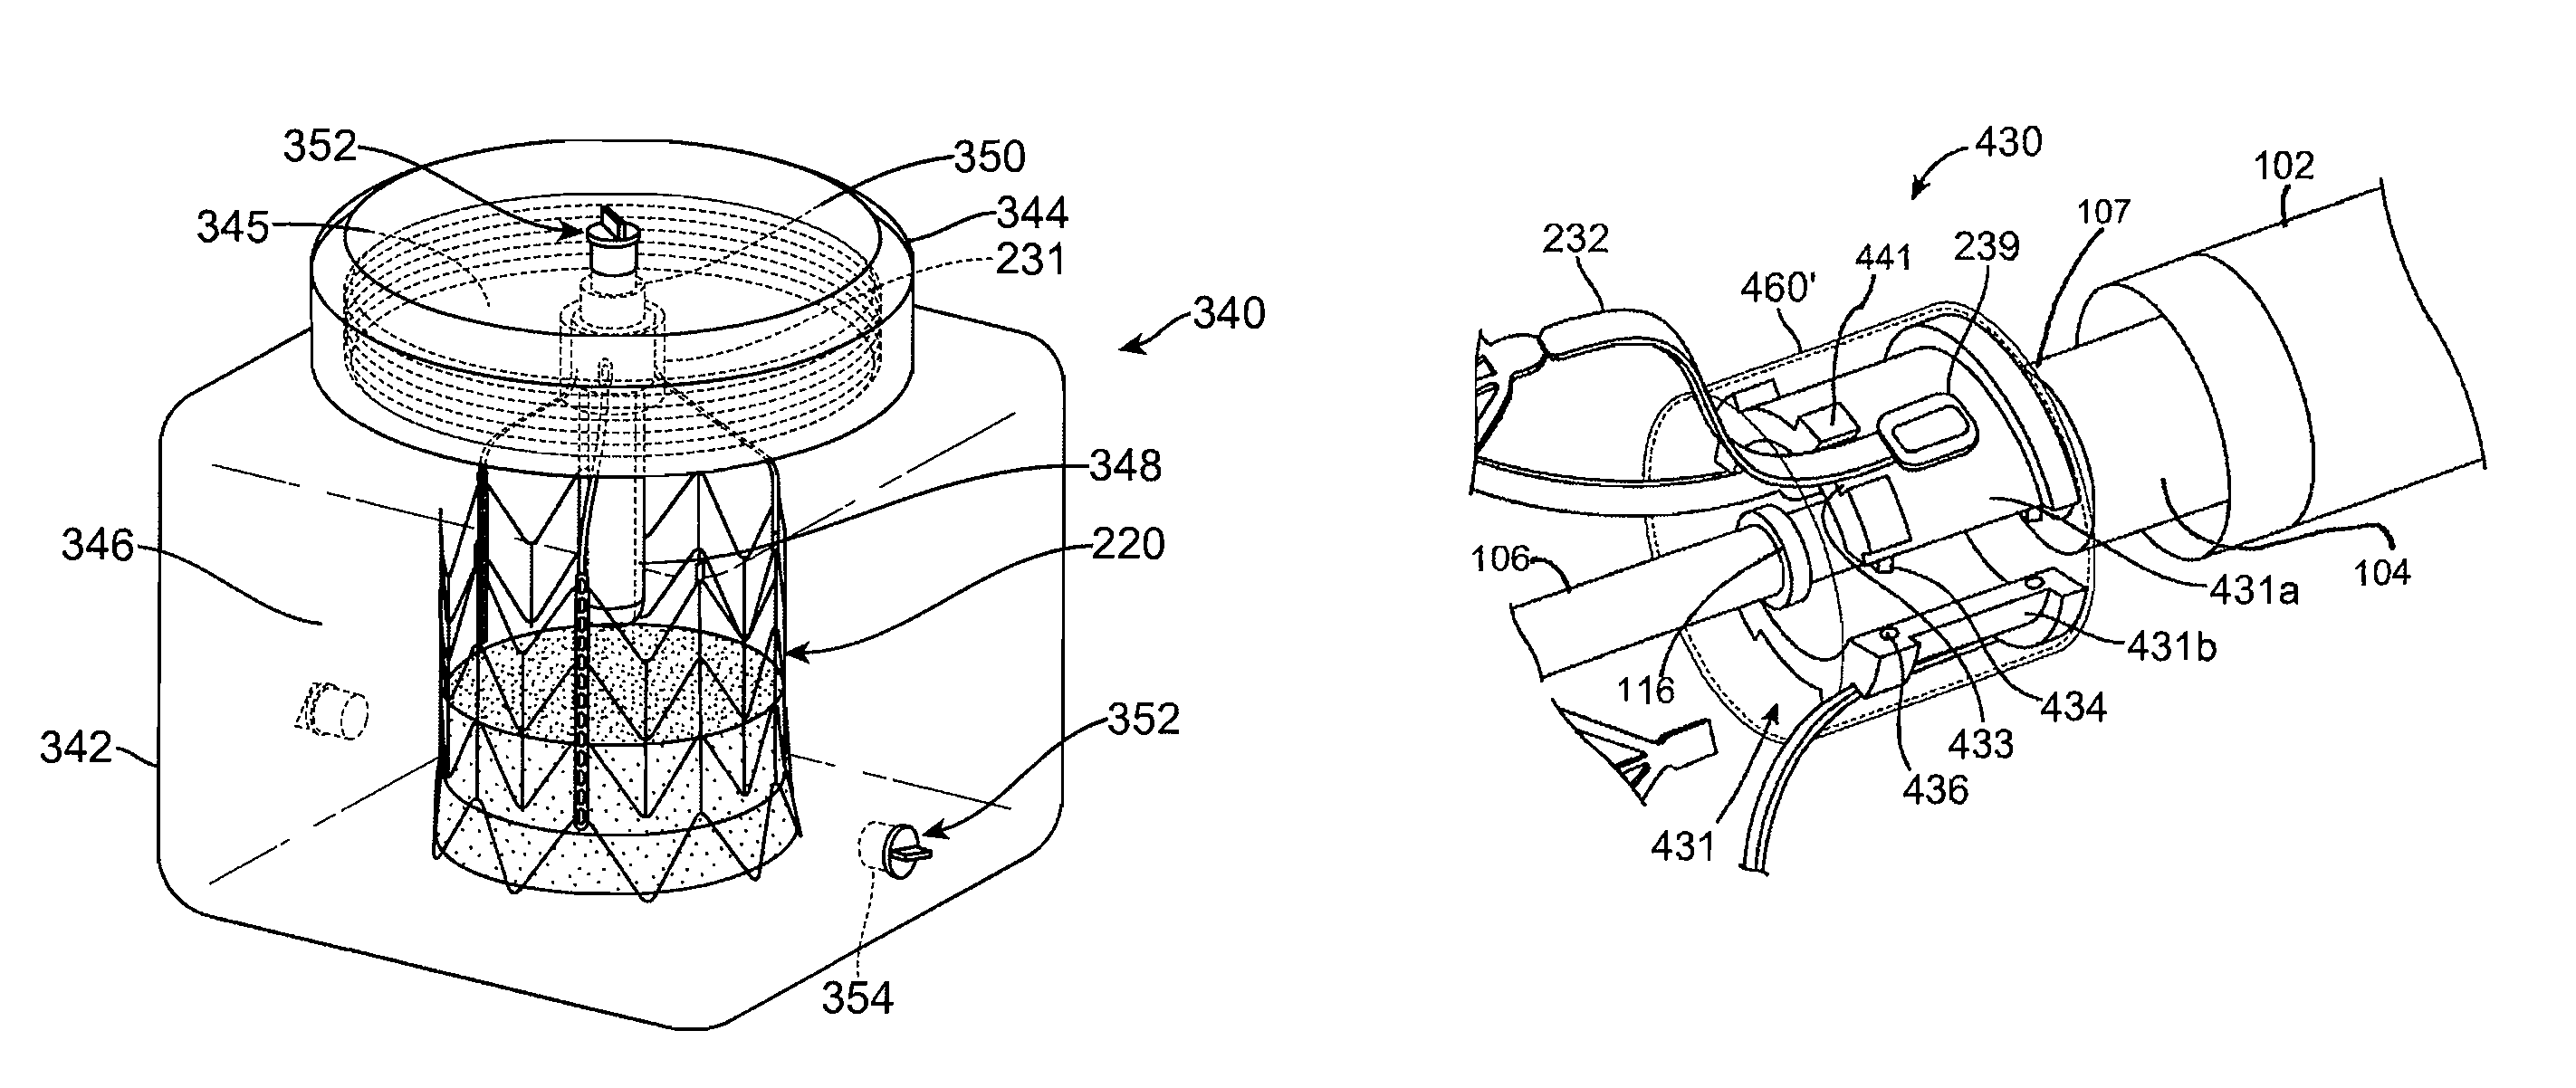 Packaging systems for percutaneously deliverable bioprosthetic valves